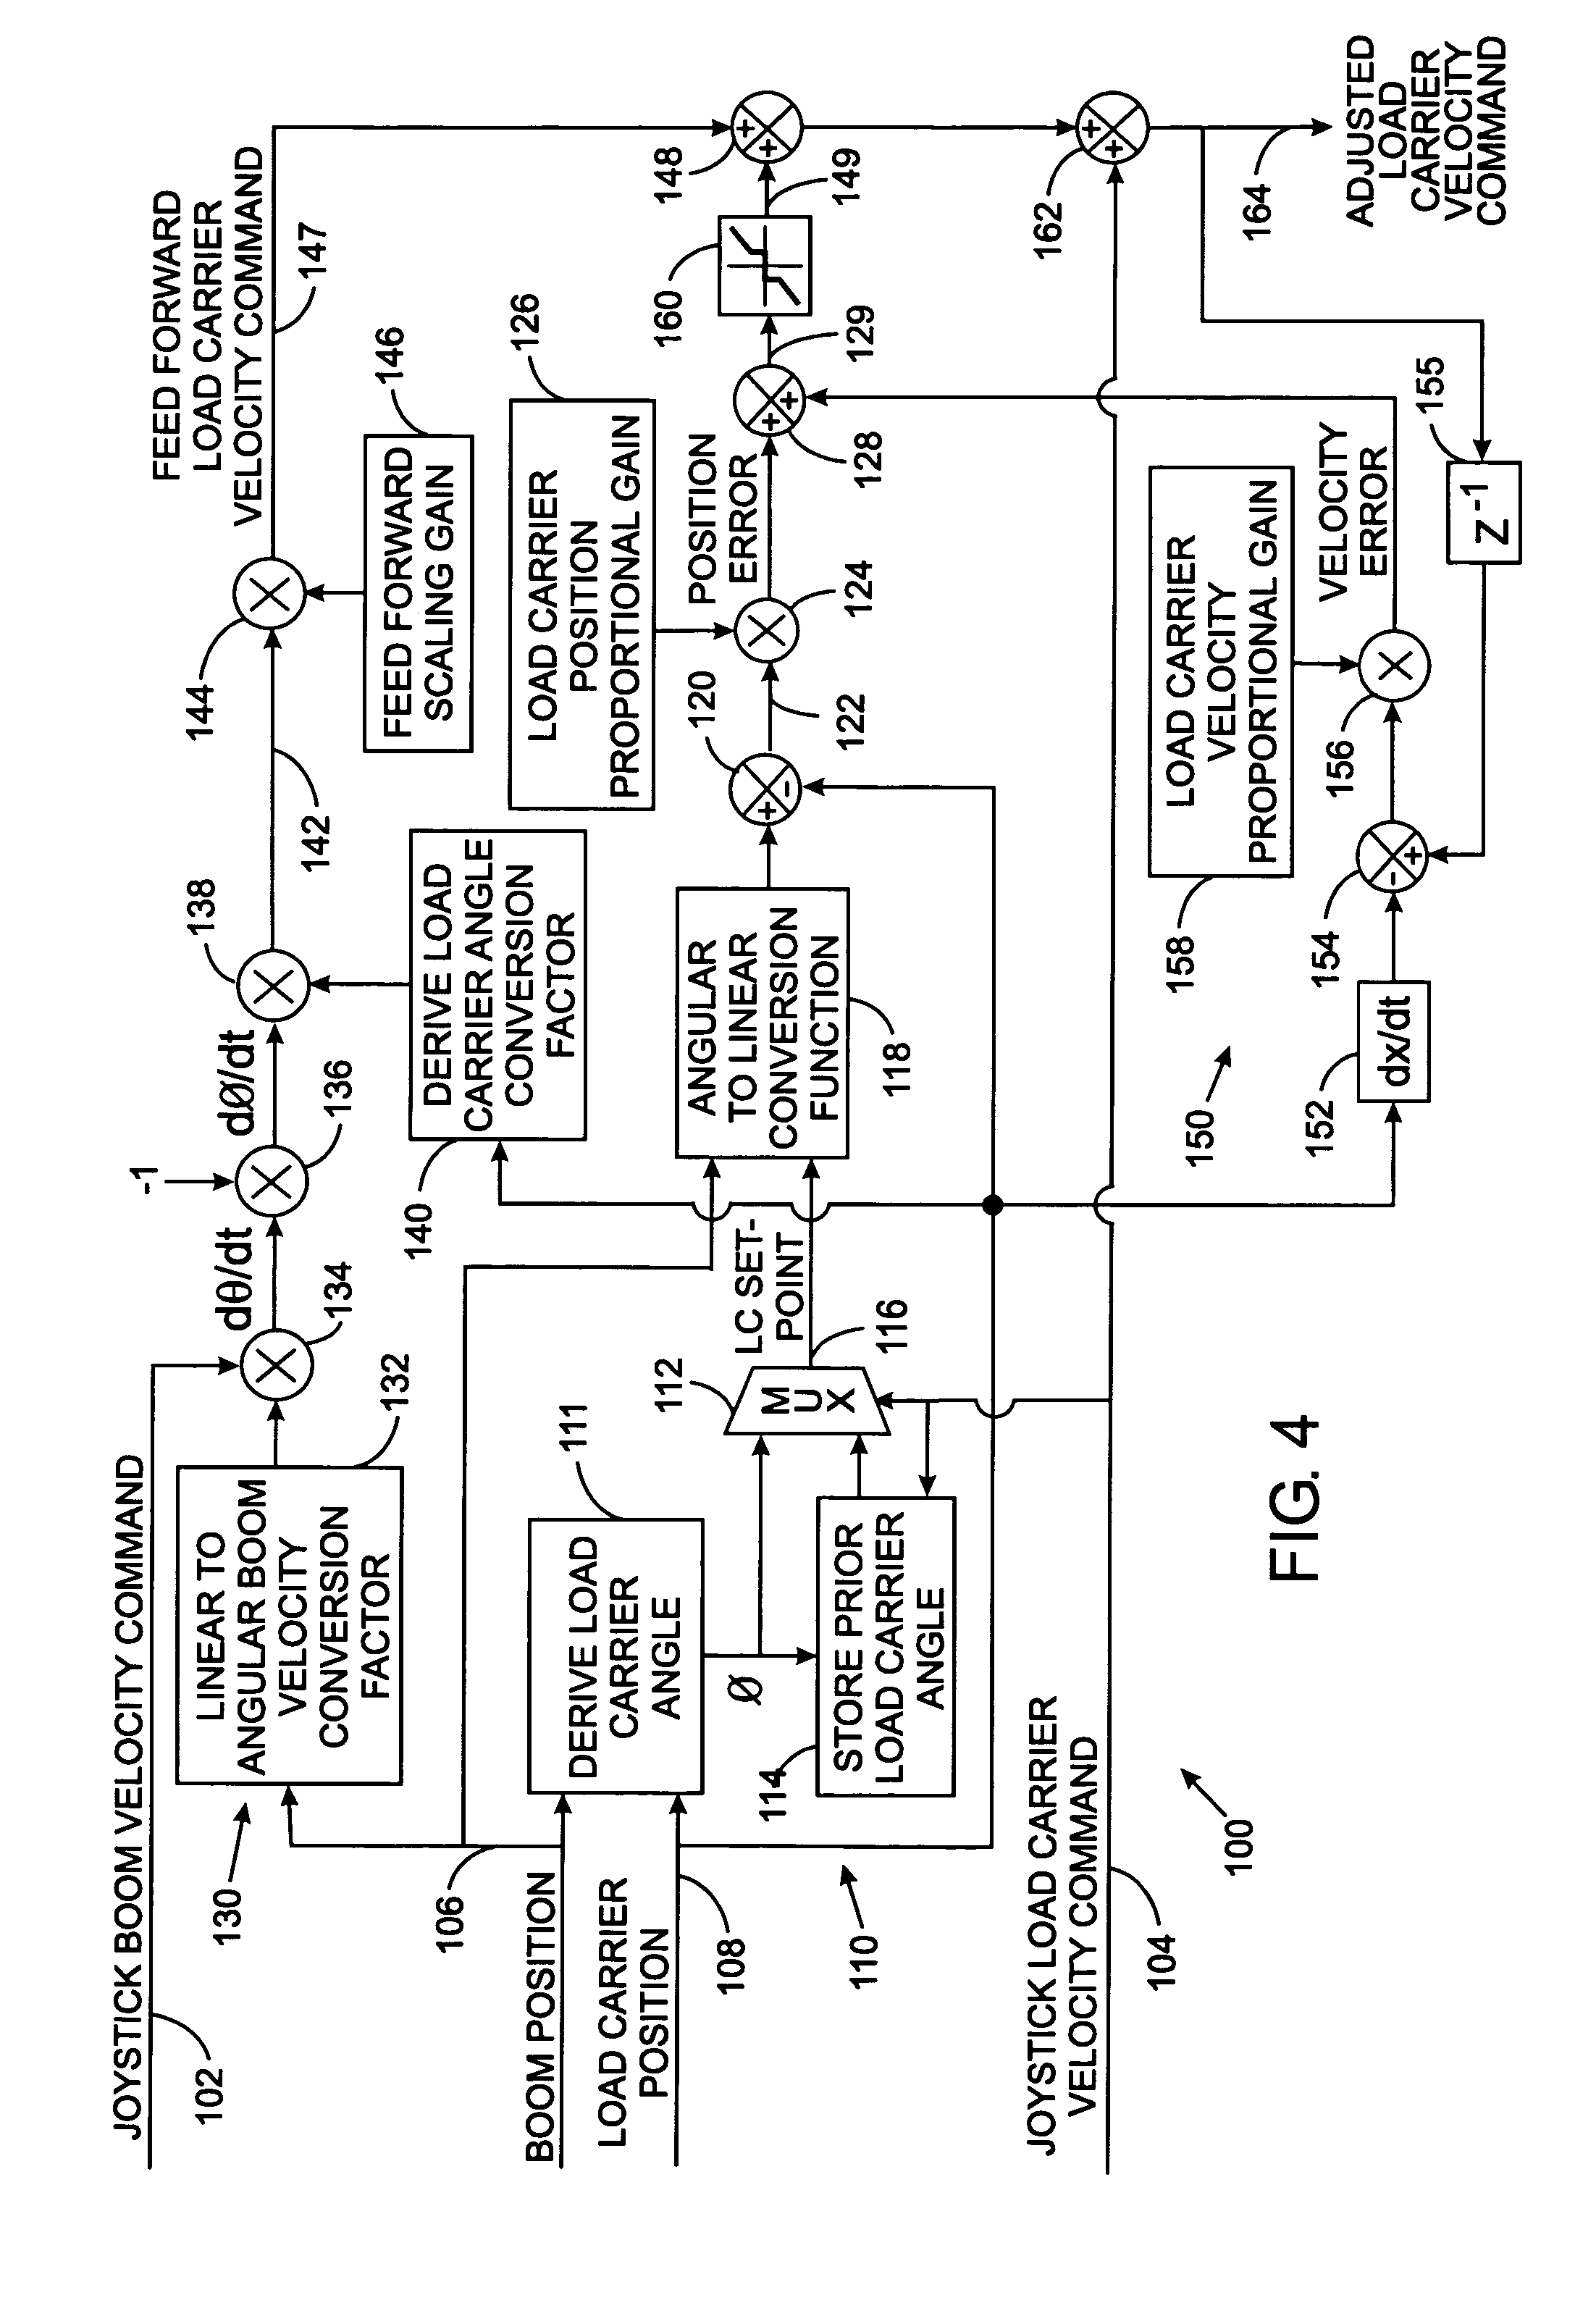 Automatic hydraulic load leveling system for a work vehicle